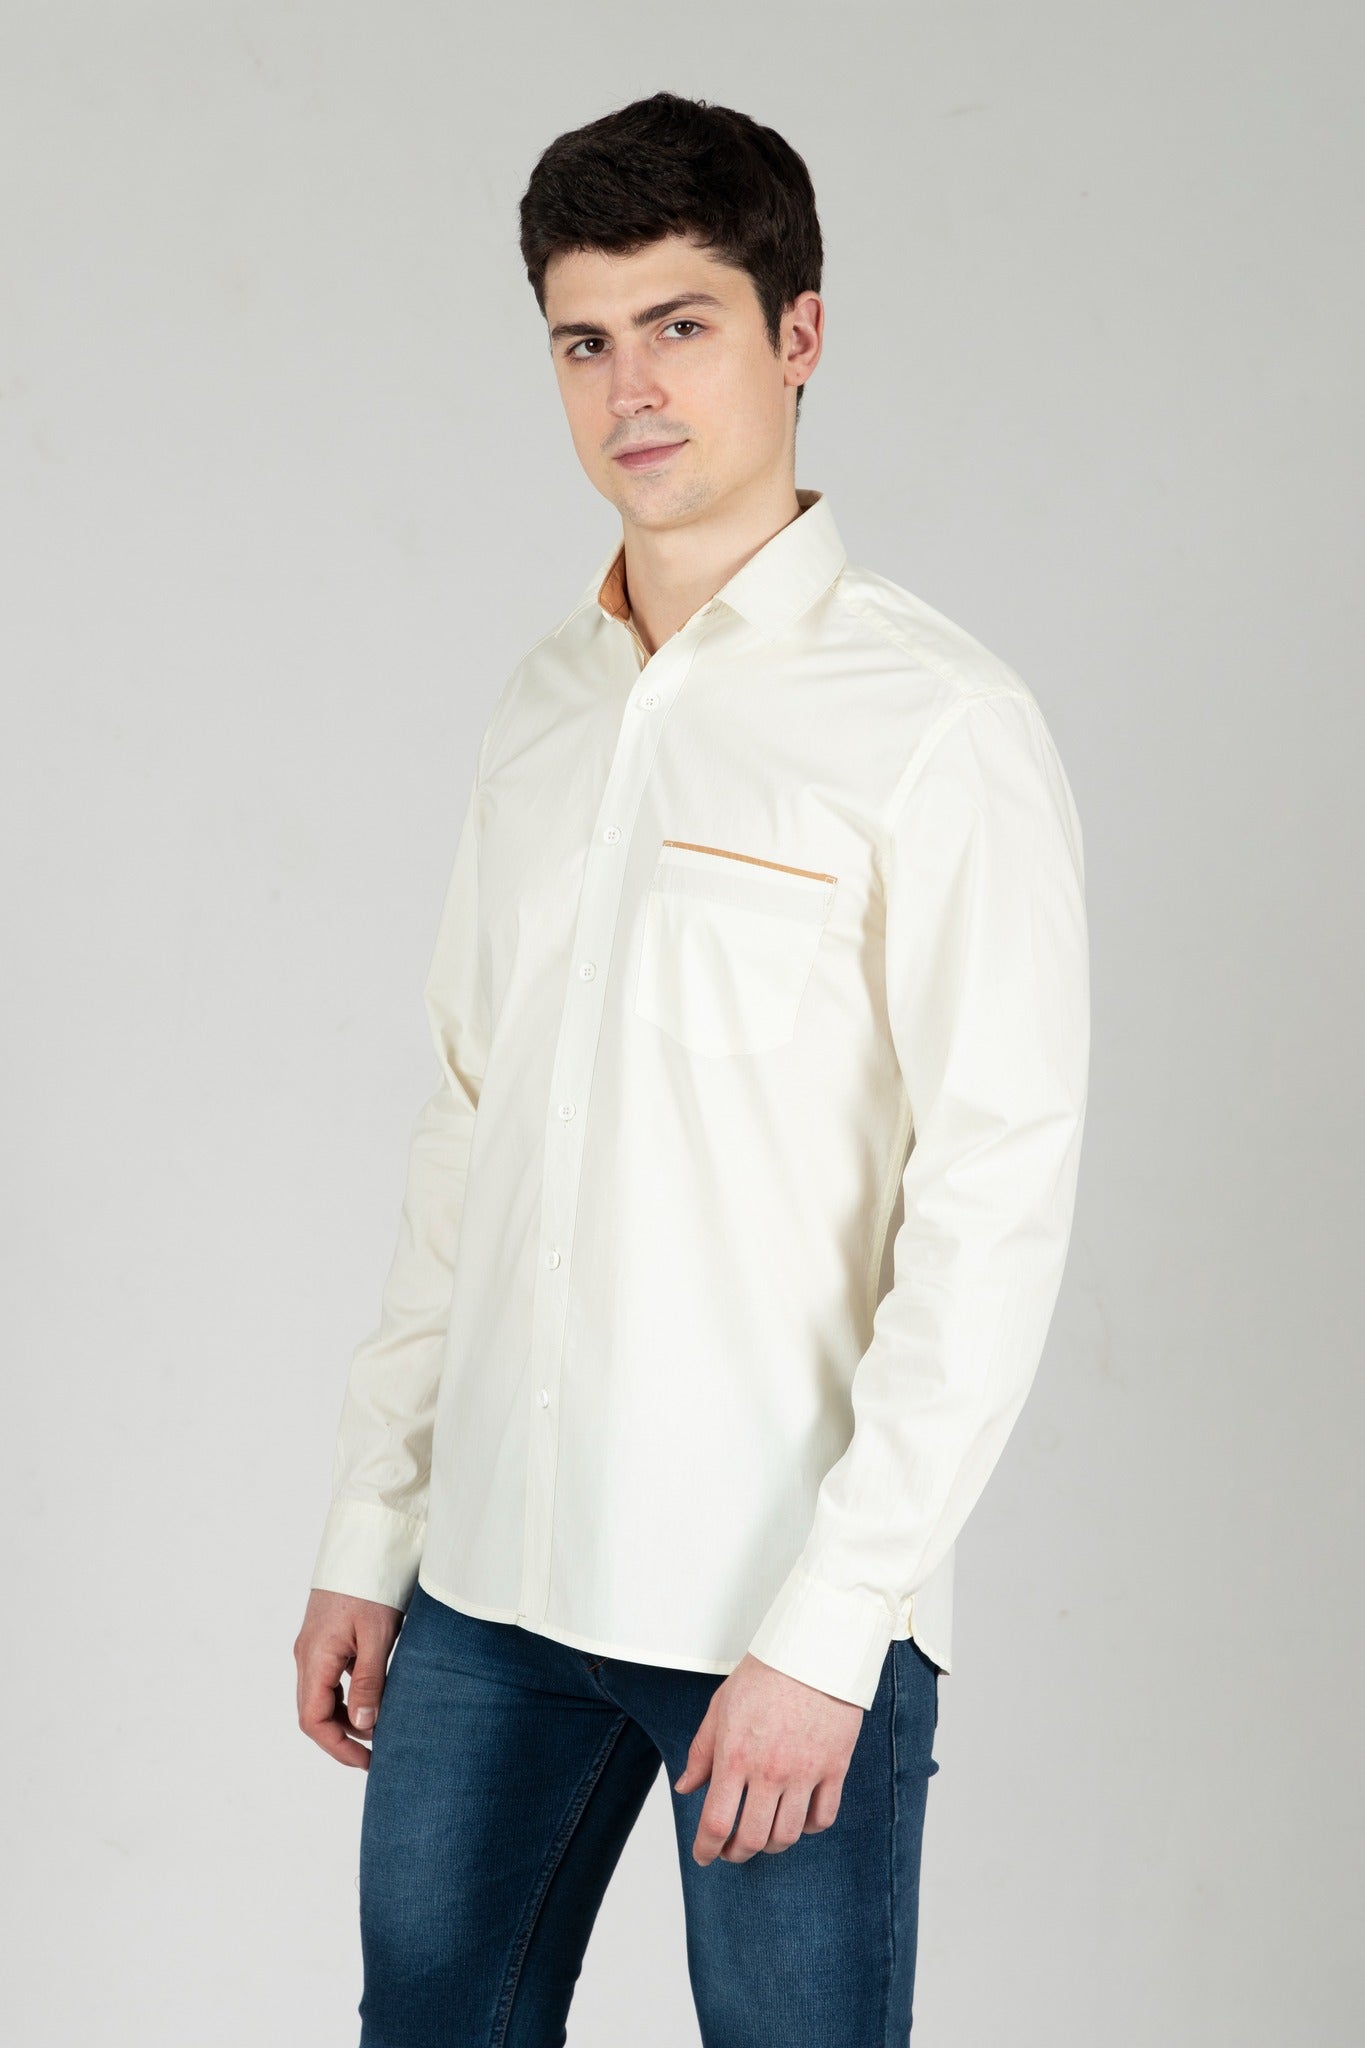 Off White Contrast Men Shirt in Cotton with Full Sleeves & Single Pocket - OZMOD